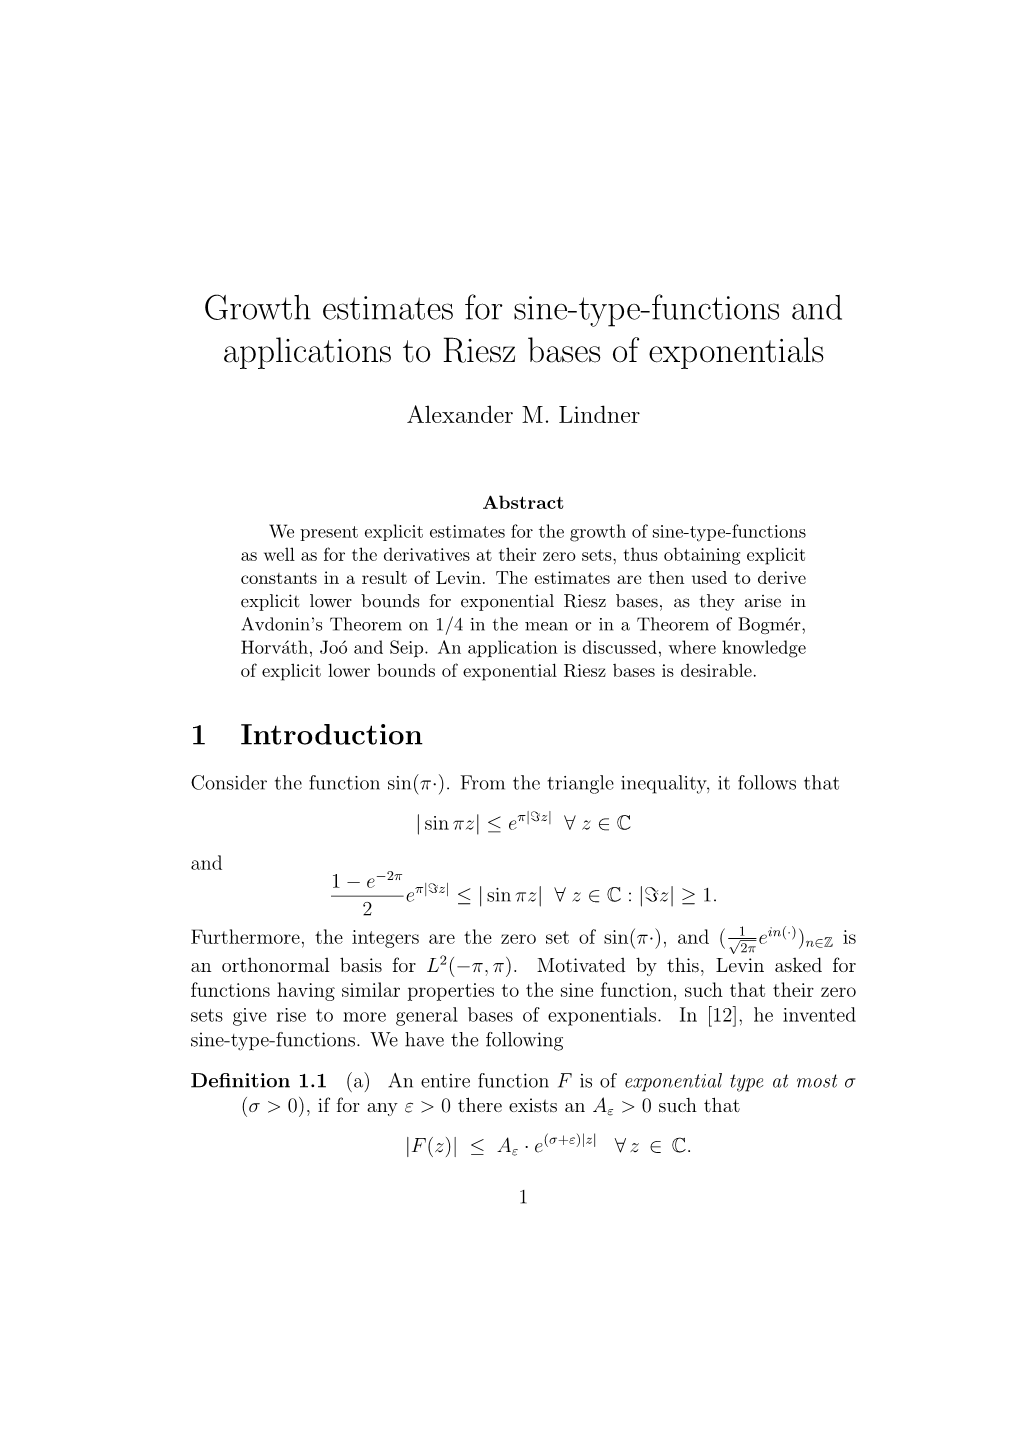 Growth Estimates for Sine-Type-Functions and Applications to Riesz Bases of Exponentials